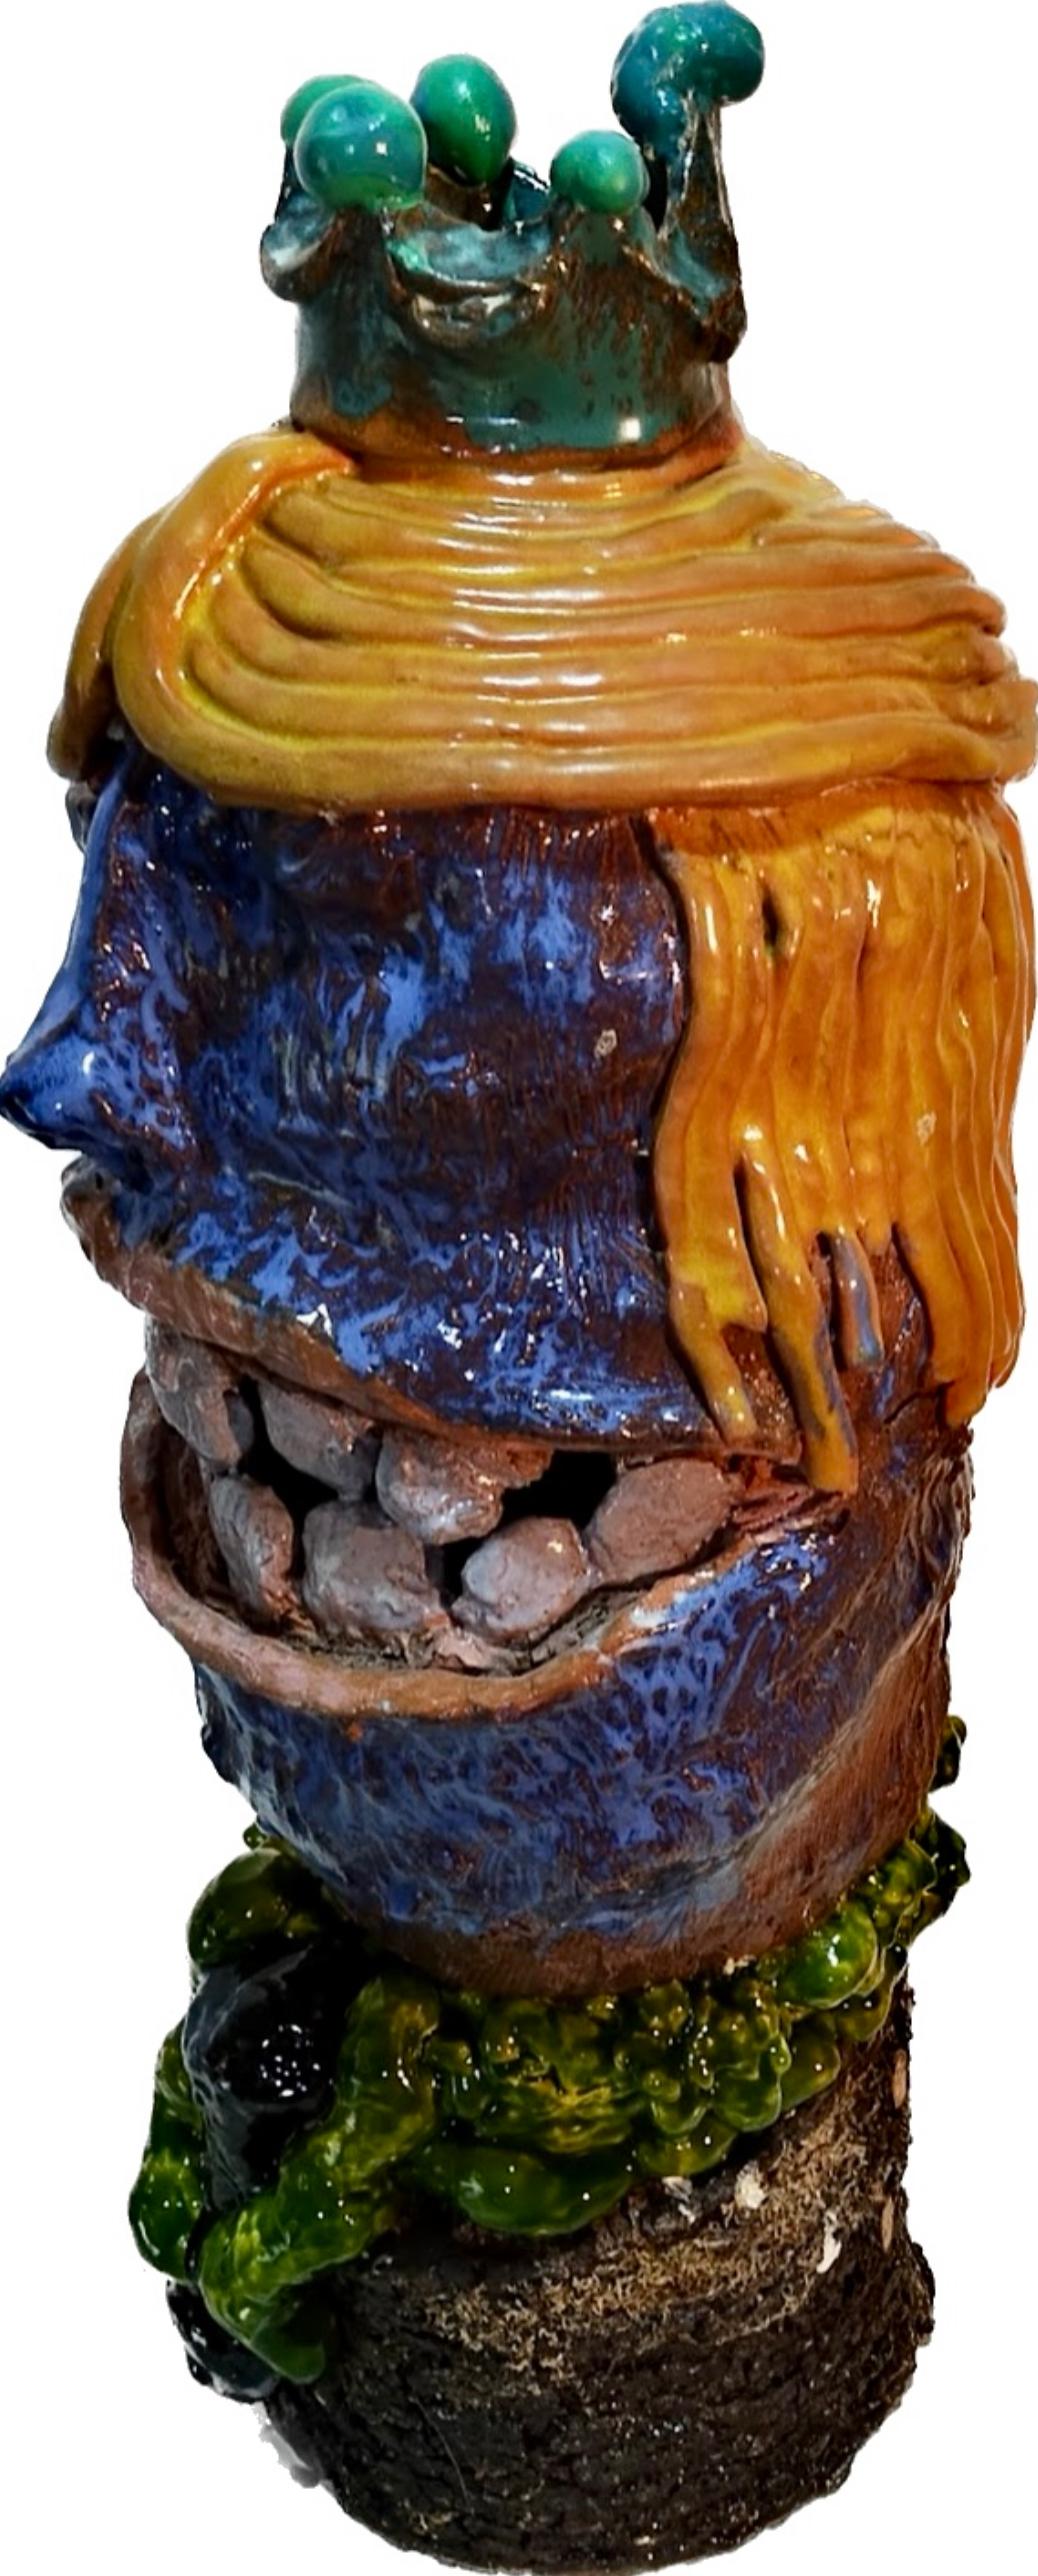 Artist: Jim Pallas (1941)
Title: Blind Queen
Year: 2018
Medium: Epoxy, ceramic, wood log
Size: 11 x 5 x 5 inches
Condition: Excellent
Inscription: Signed and dated

JIM PALLAS (1941-) American painter, draughtsman, sculptor, and printmaker. An